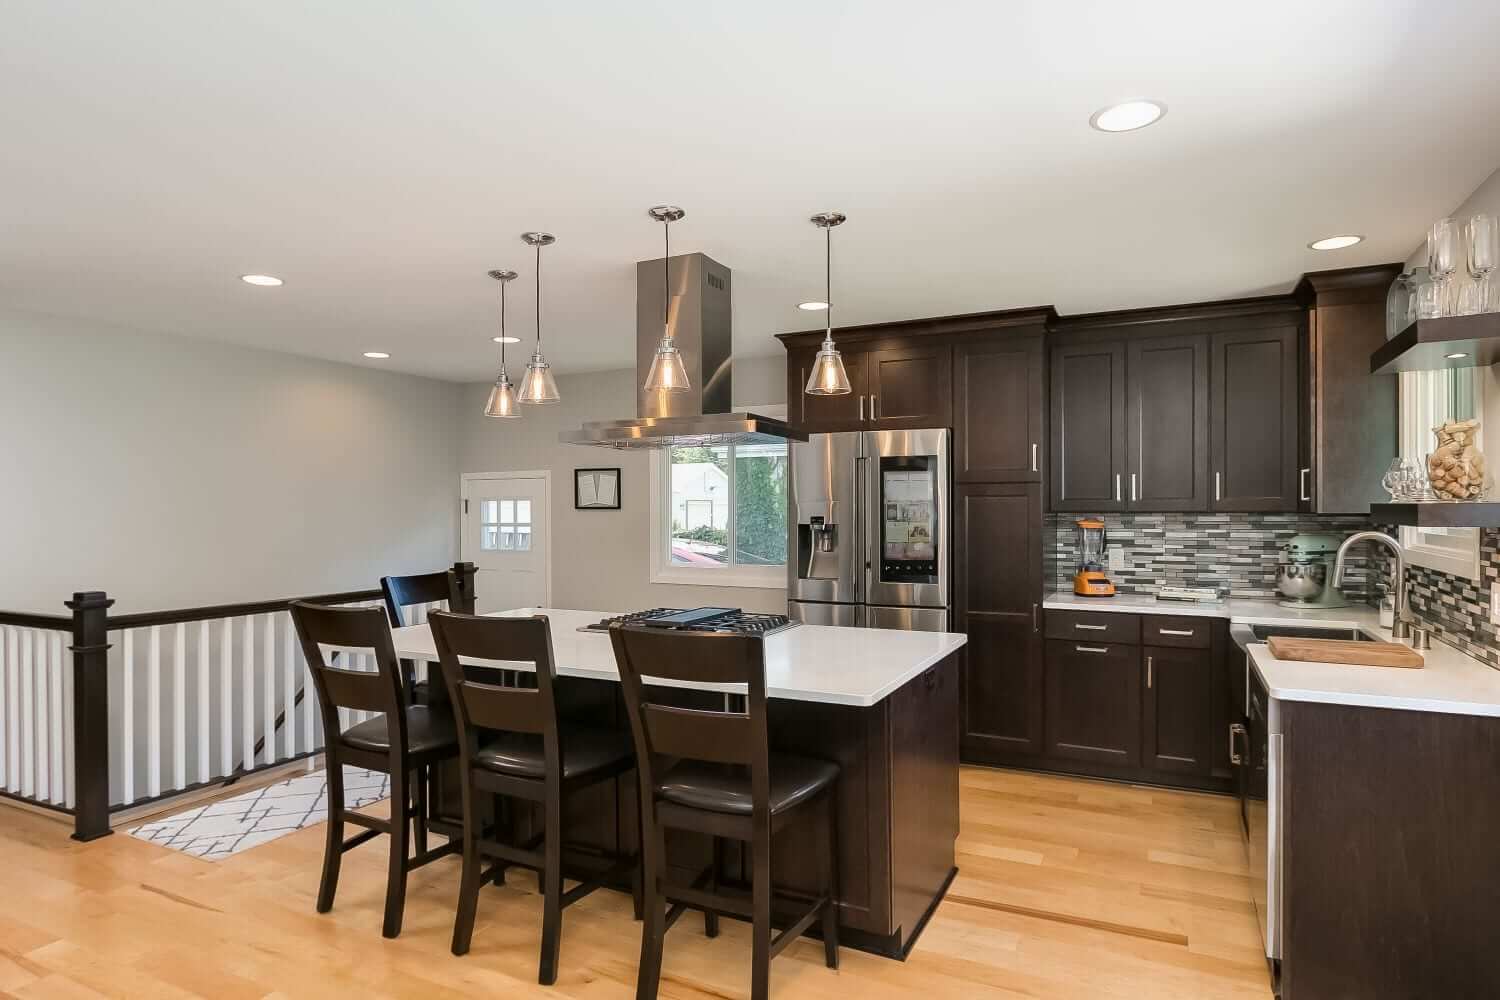 Kitchen remodeling with granite countertops and pendant lights.